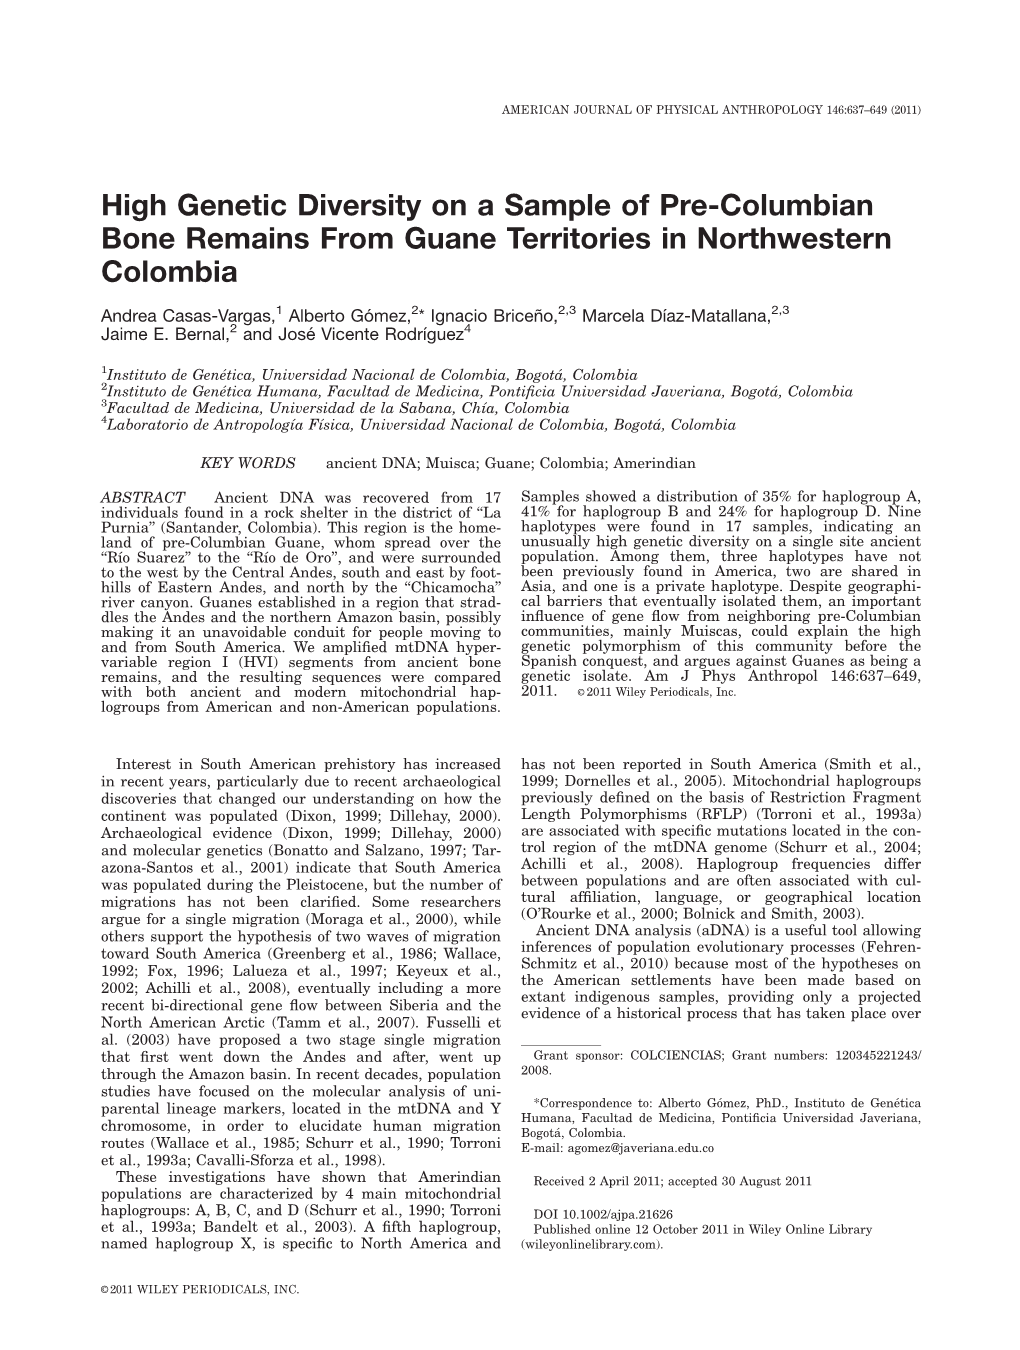 High Genetic Diversity on a Sample of Precolumbian Bone Remains From